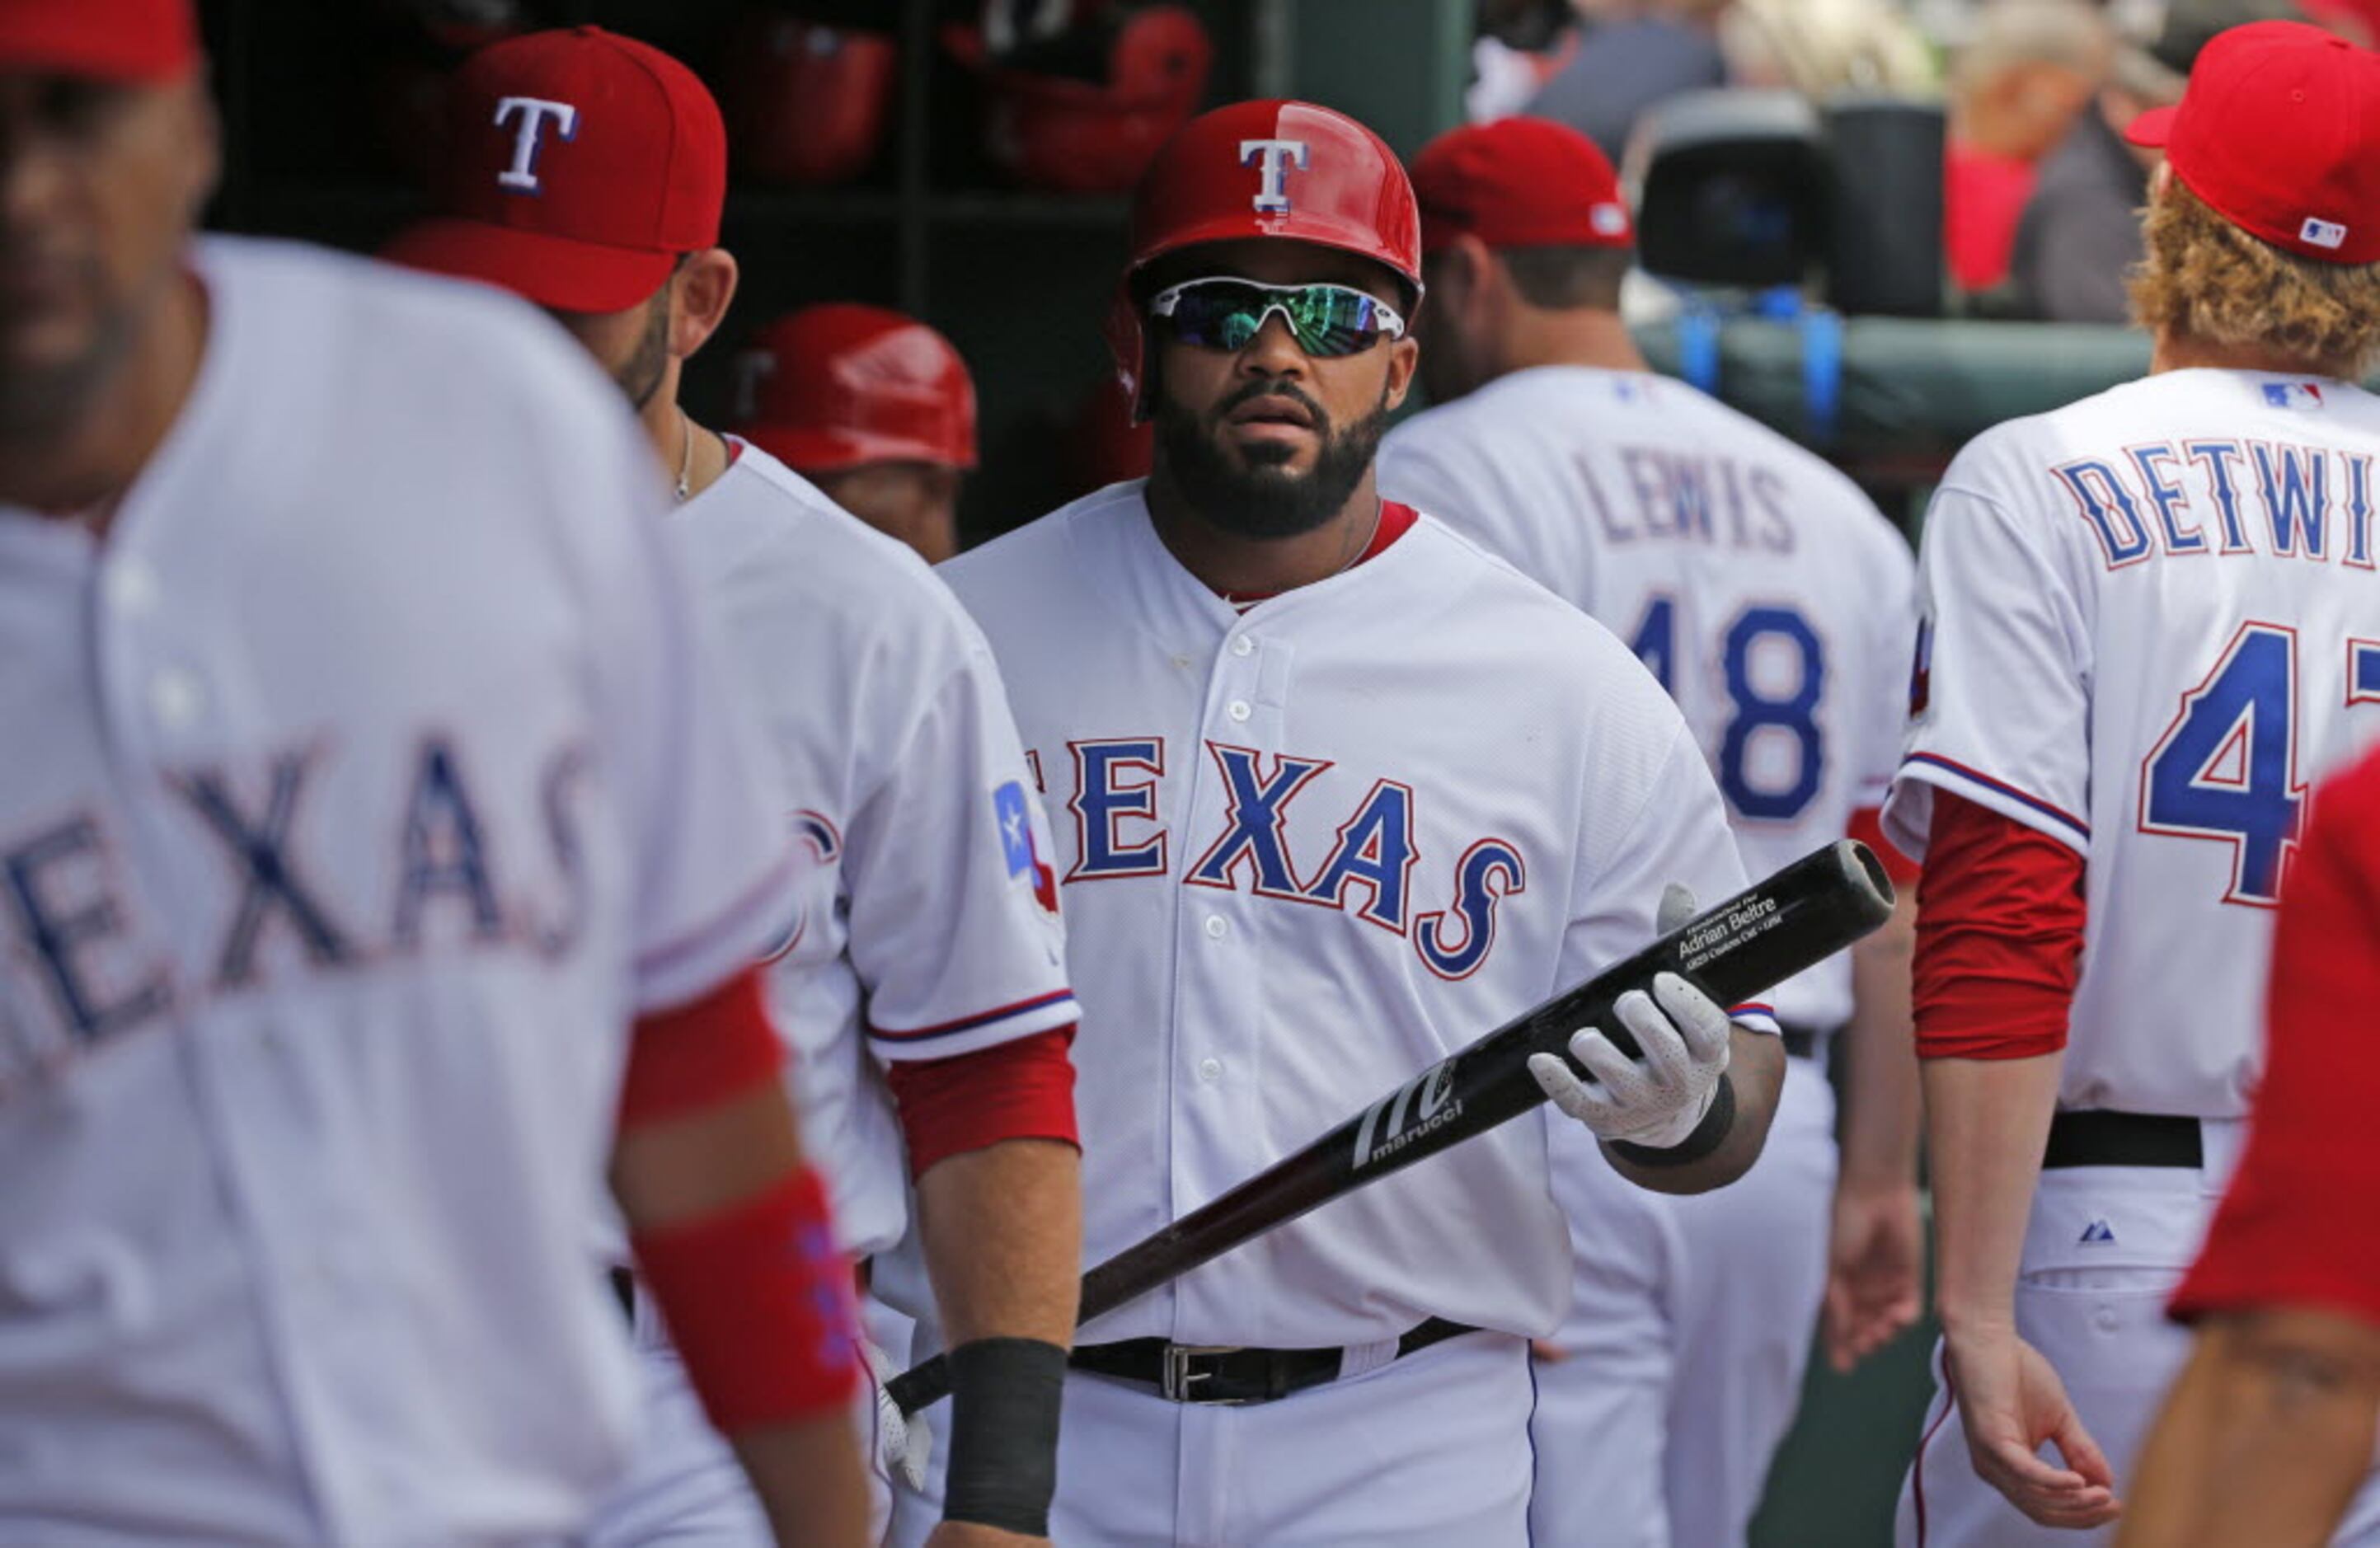 Prince Fielder's 2017 salary is worth more than 21 players on the